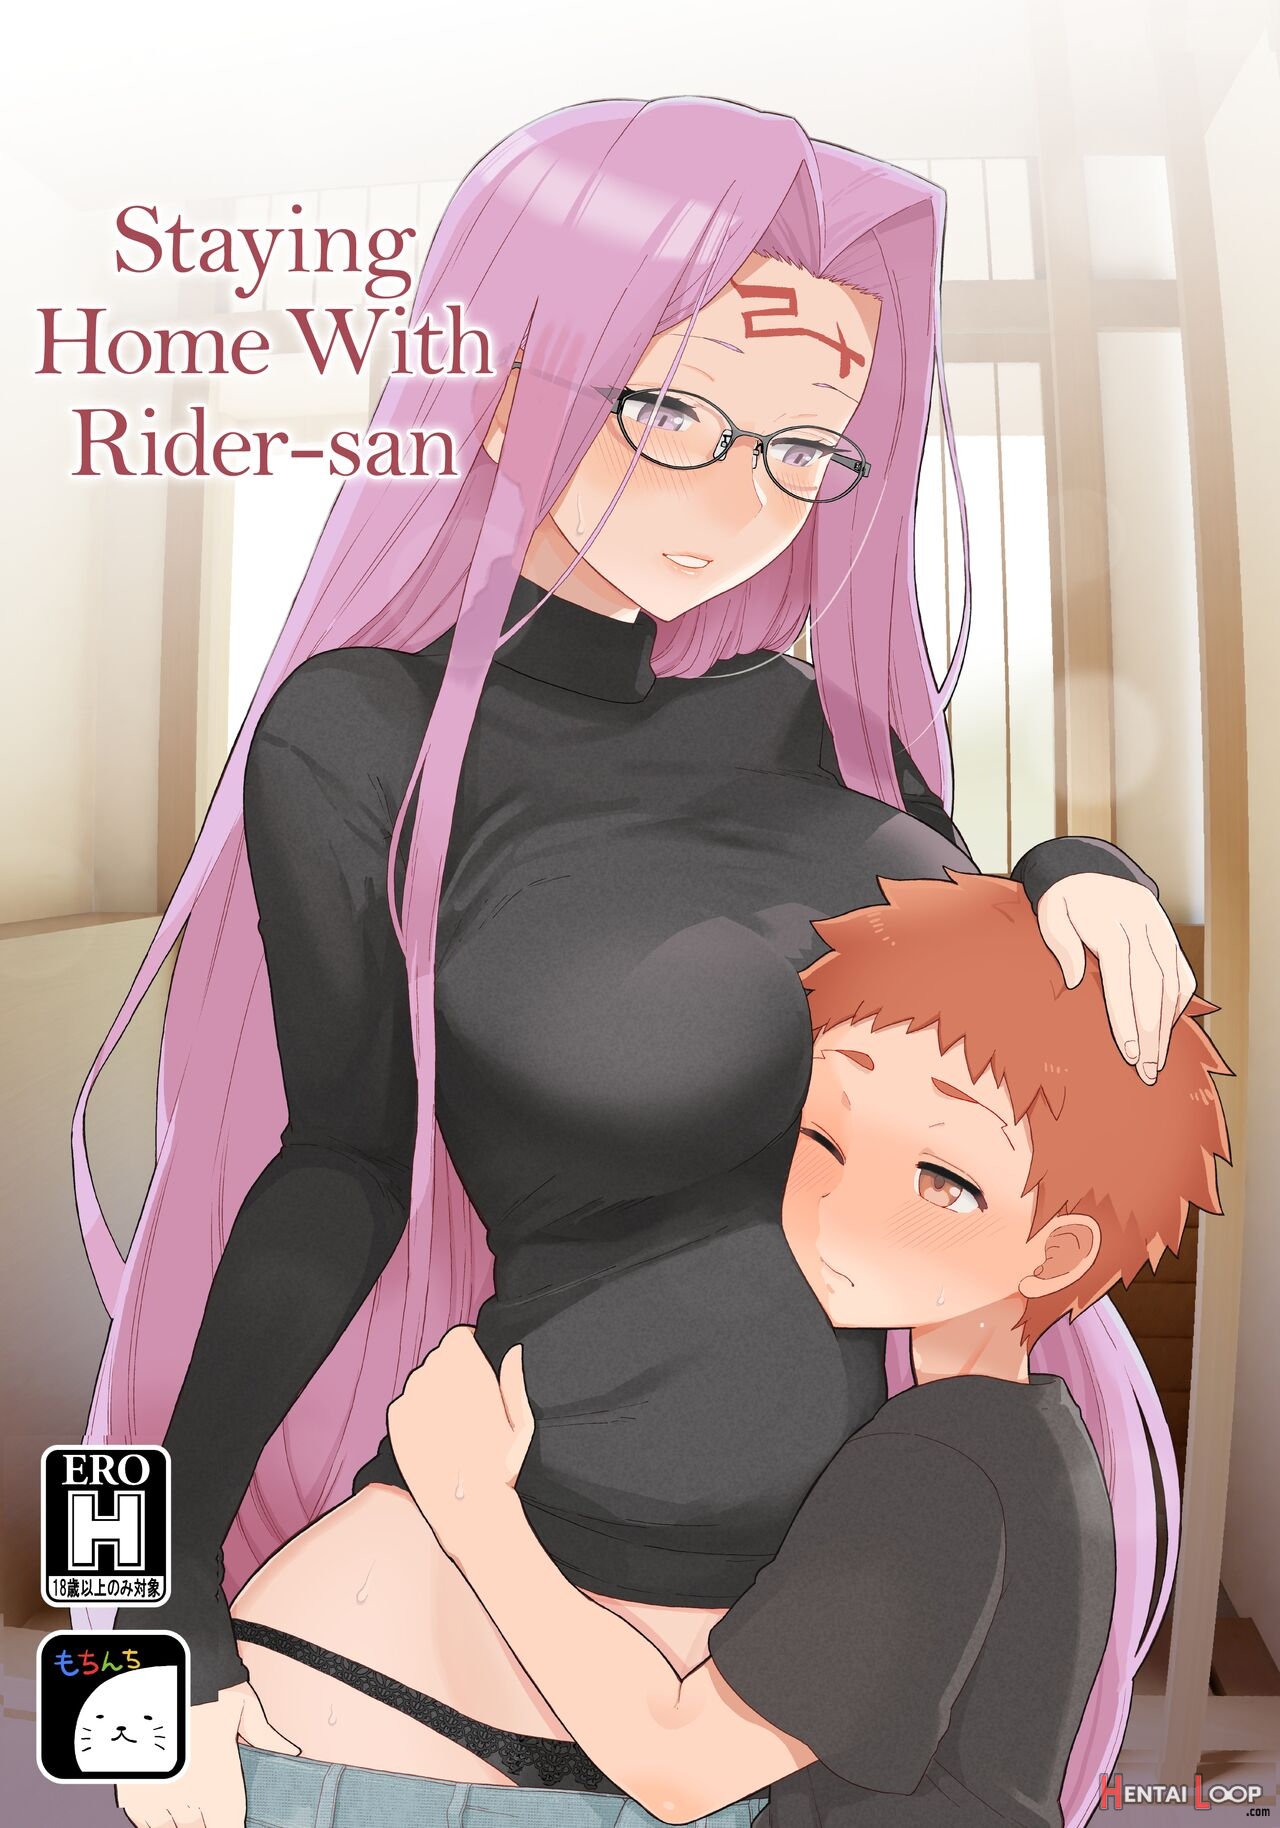 Staying Home With Rider-san page 1